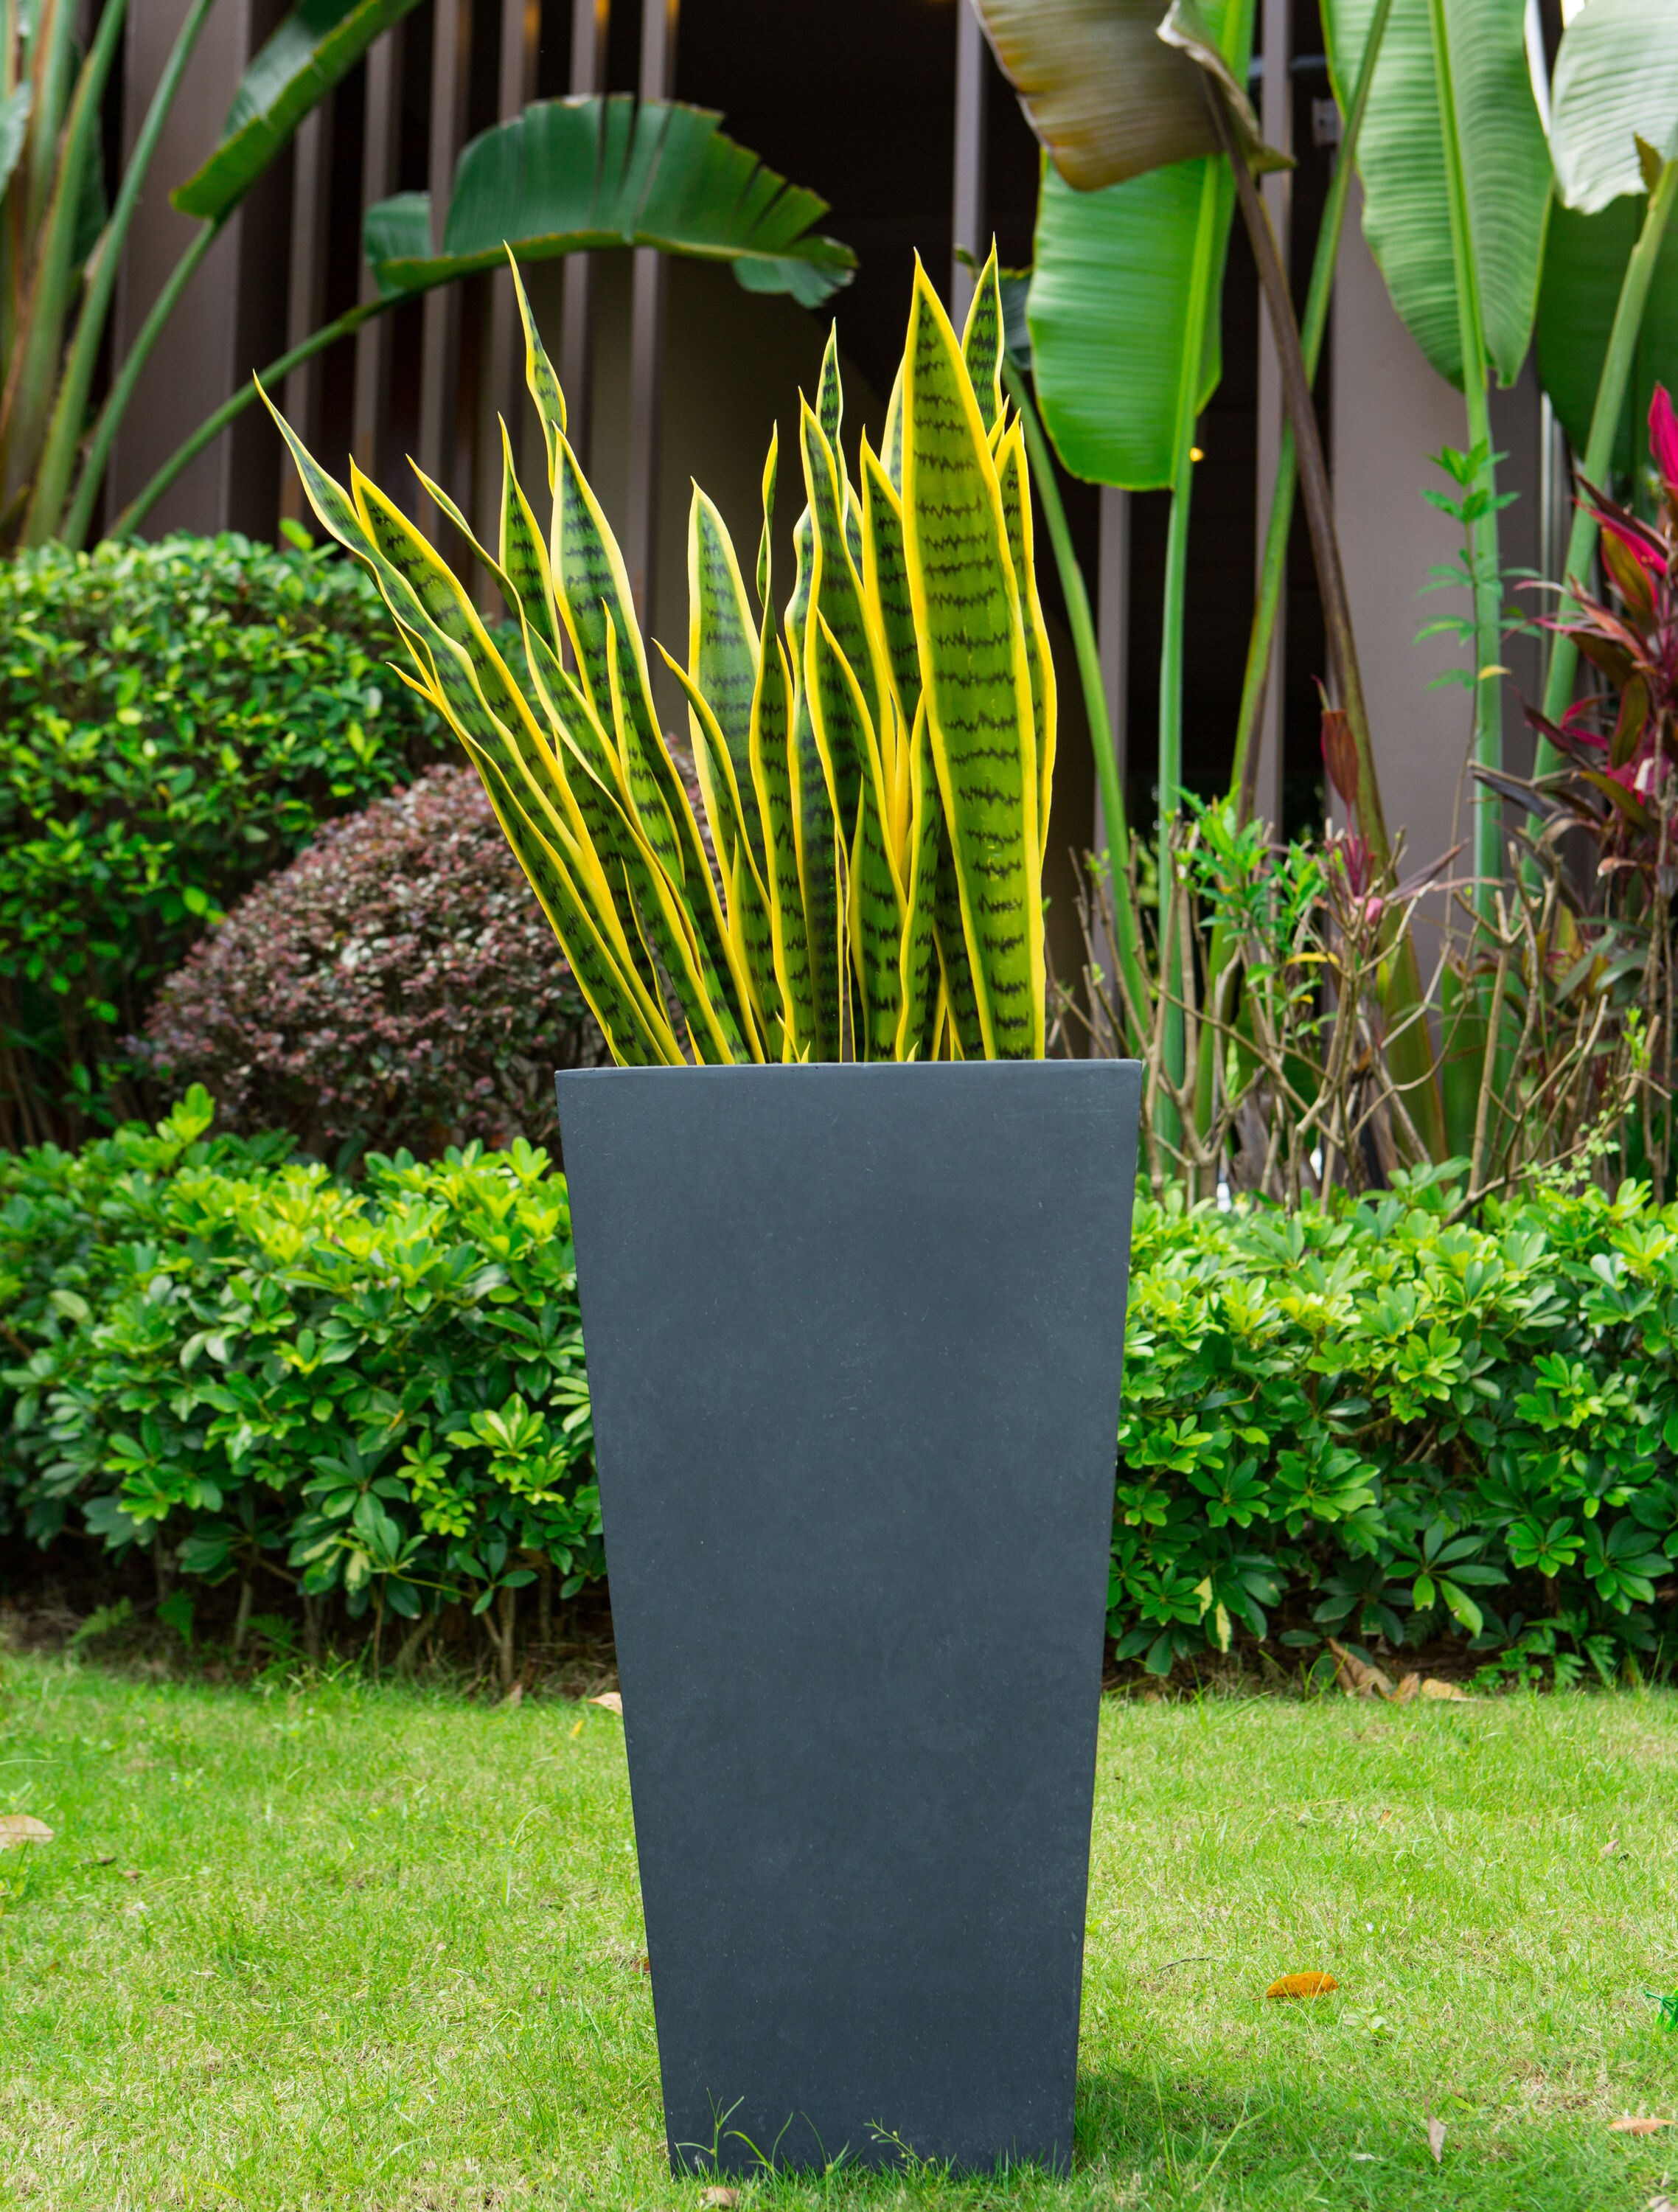 KANTE 12.6-in W x 24.4-in H Black Concrete Contemporary/Modern Indoor ...